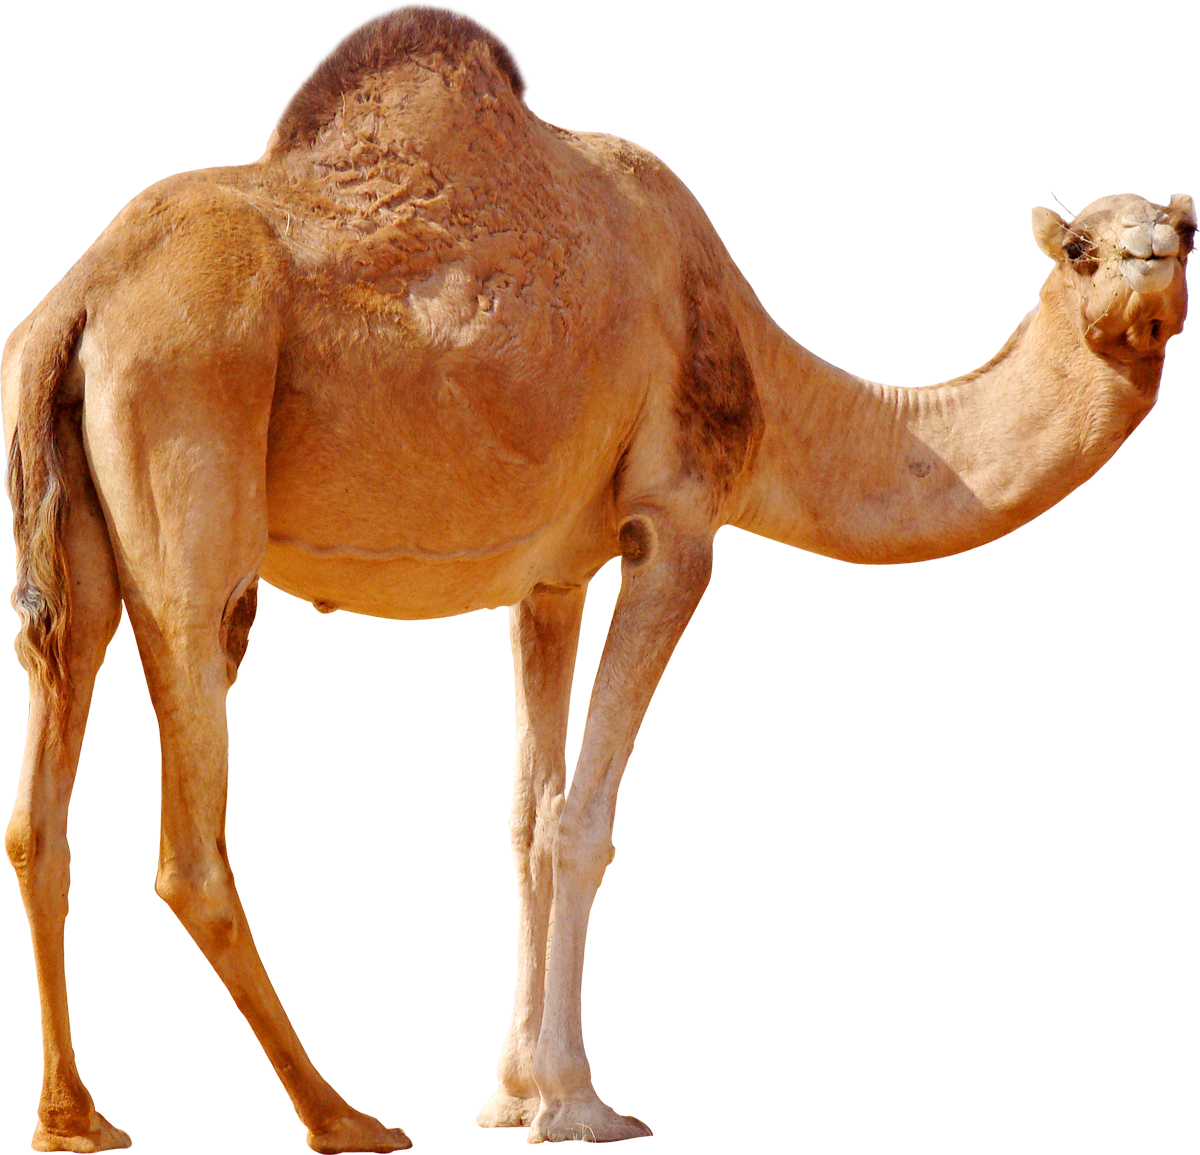 PNG File Name: Camel PlusPng.